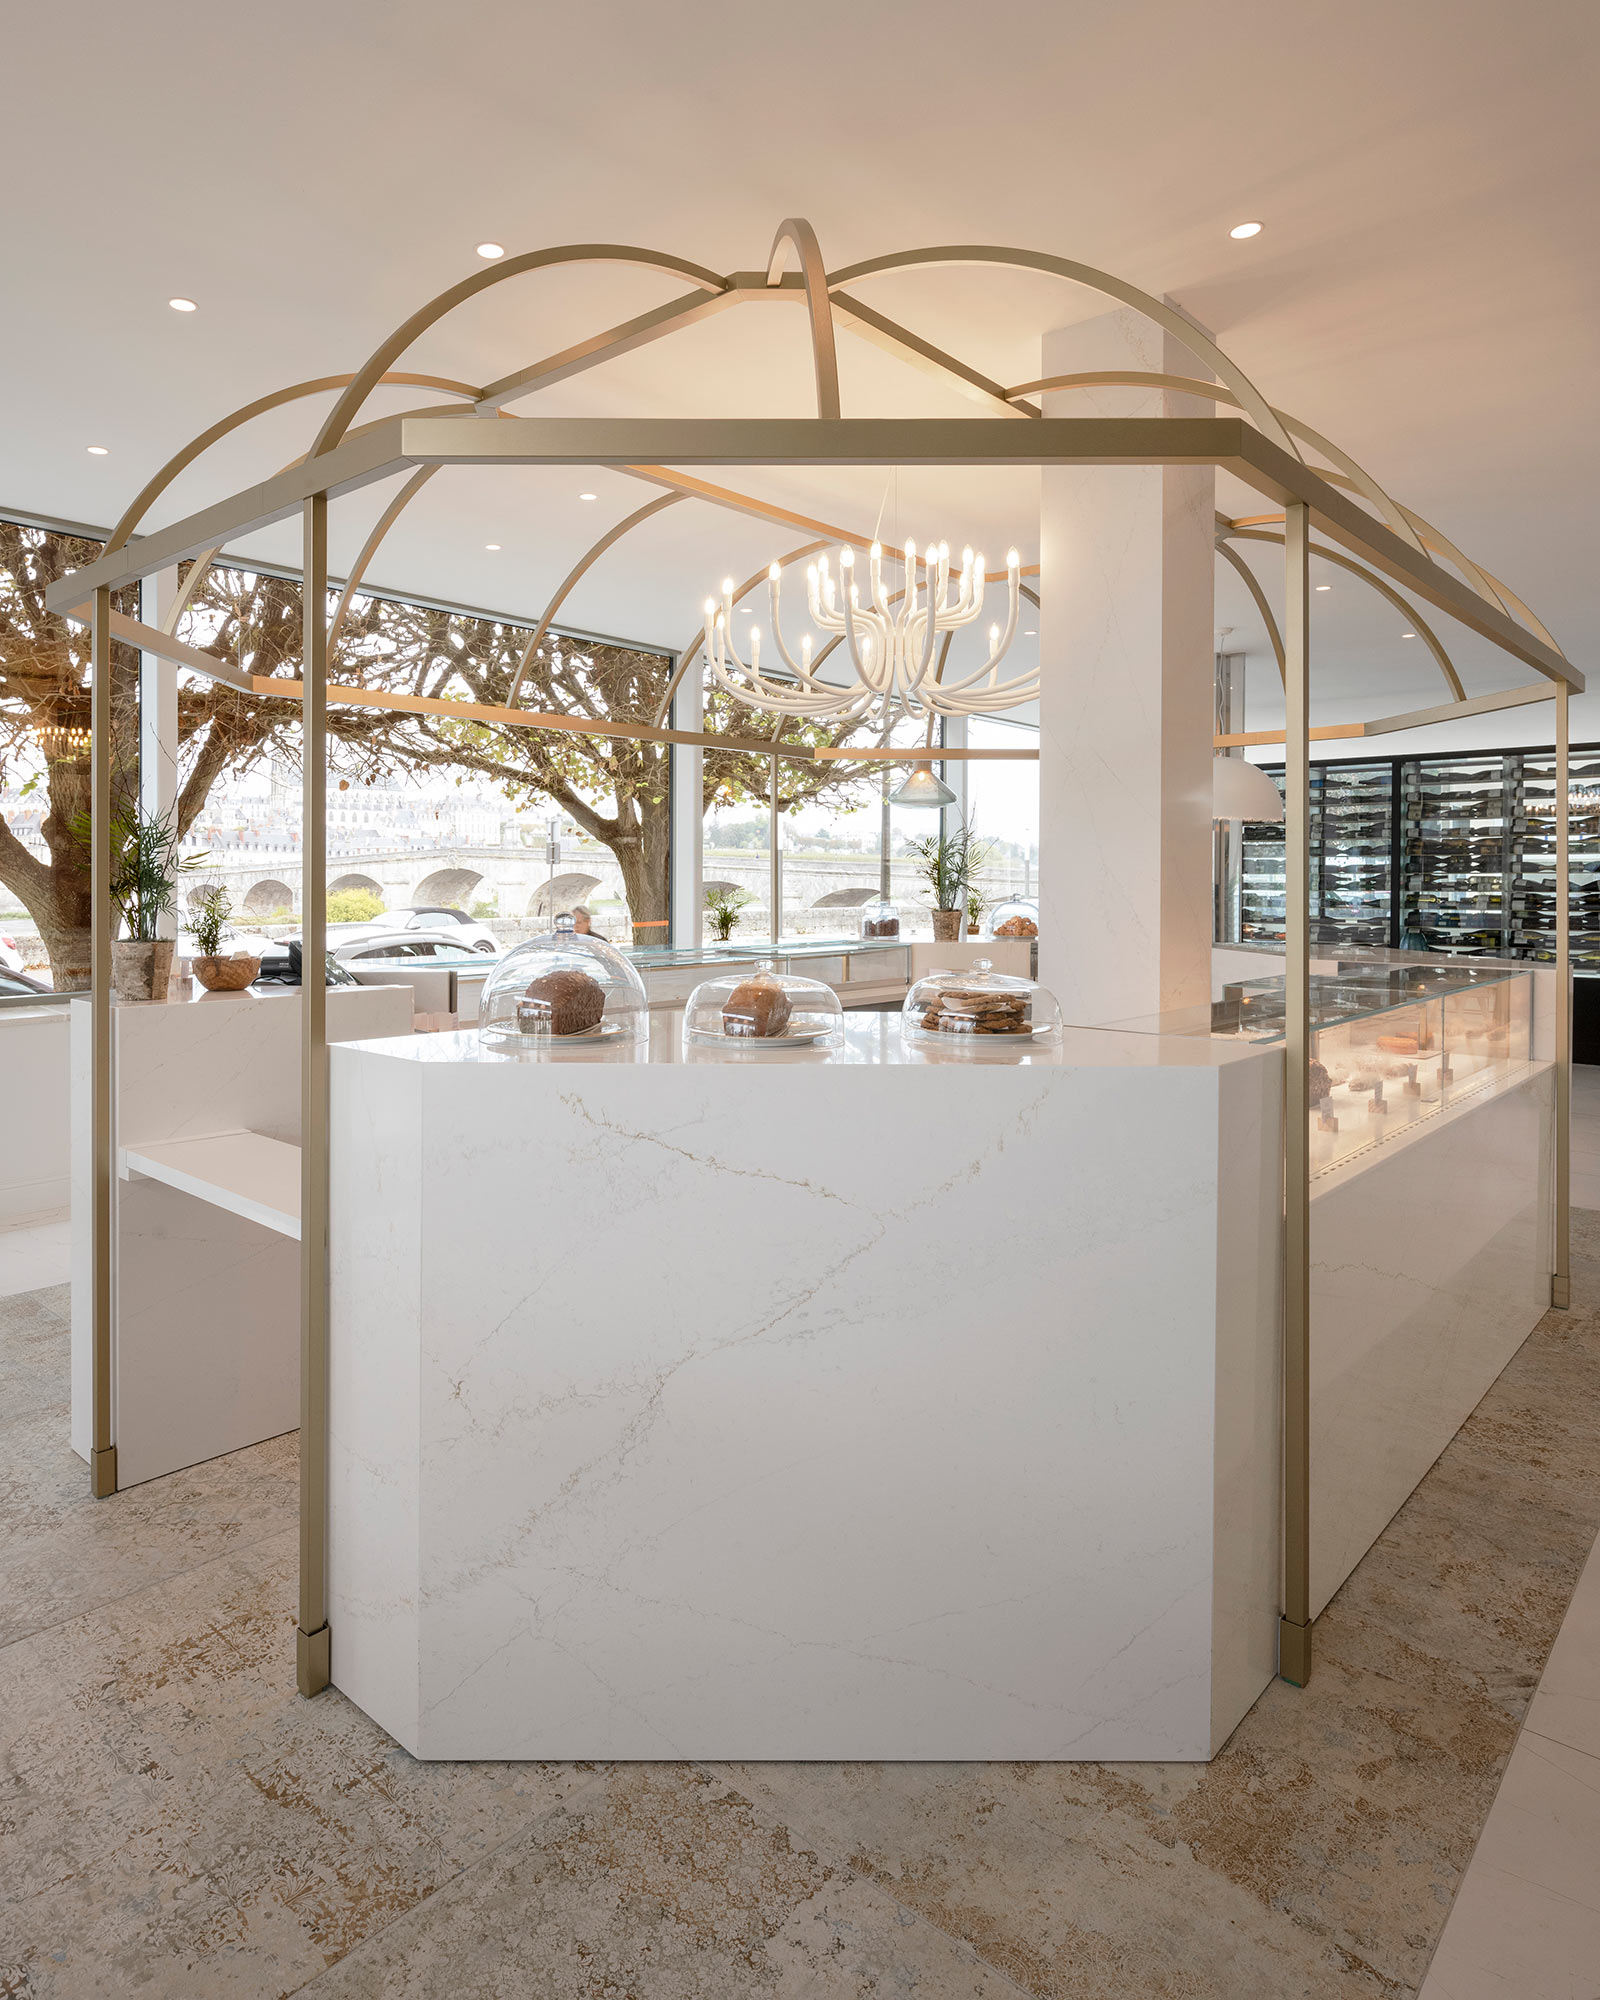 Image of Hotel Fleur de Loire 5 in The sophistication and strength of Cosentino brands for award-winning chef Christophe Hay’s new 5-star hotel  - Cosentino